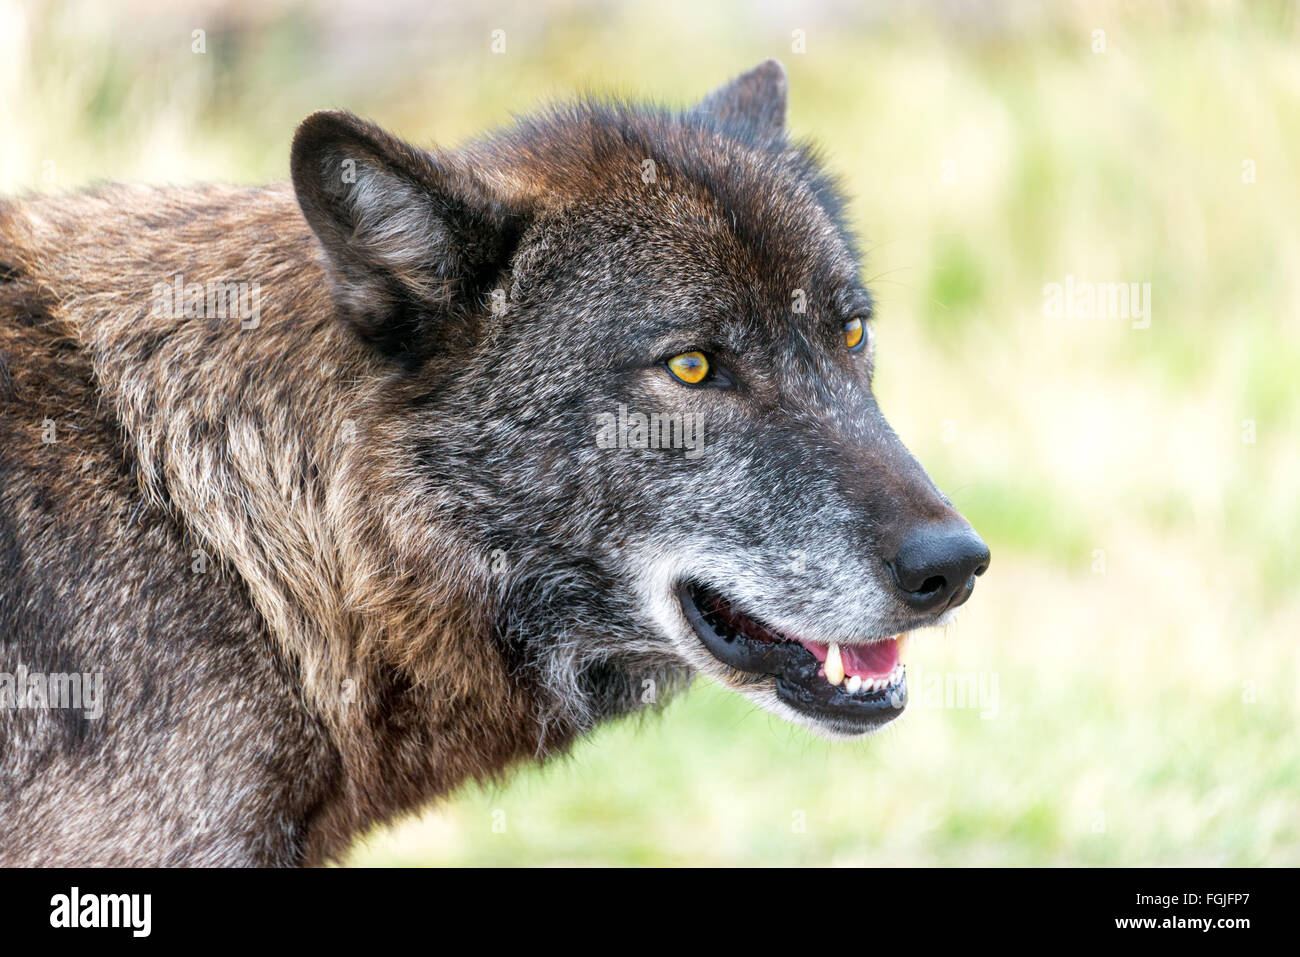 Closeup view of the face of a gray wolf Stock Photo